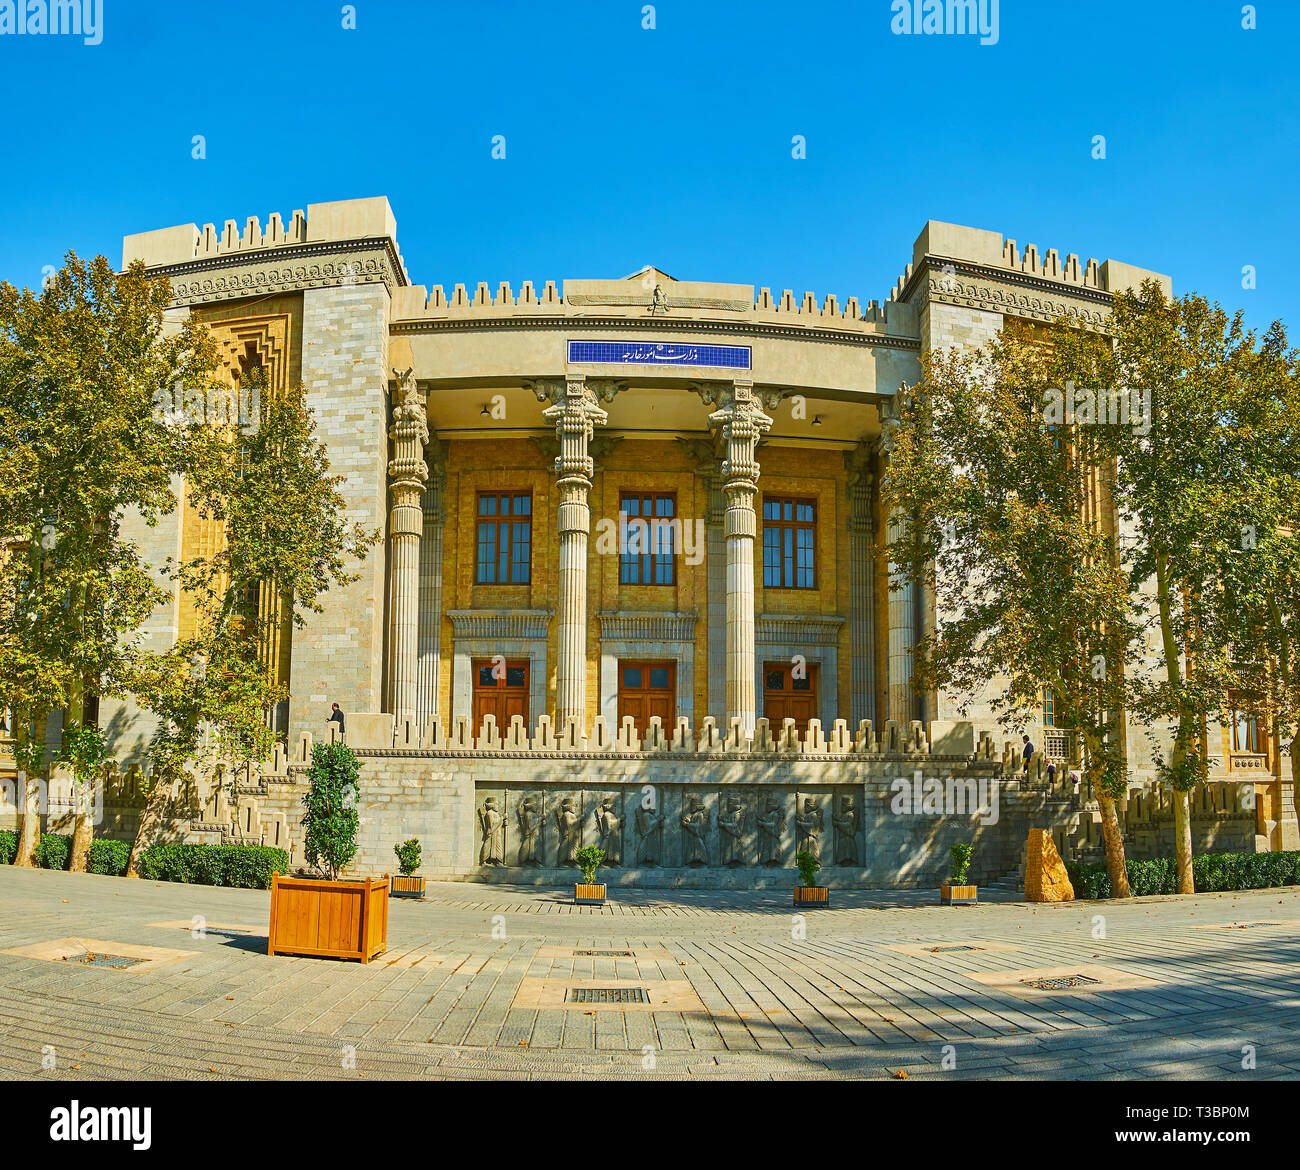 TEHRAN, IRAN - OCTOBER 25, 2017: Ministry of Foreign Affairs decorated in ancient manner with Persian columns and reliefs of Persian warriors on stair Stock Photo